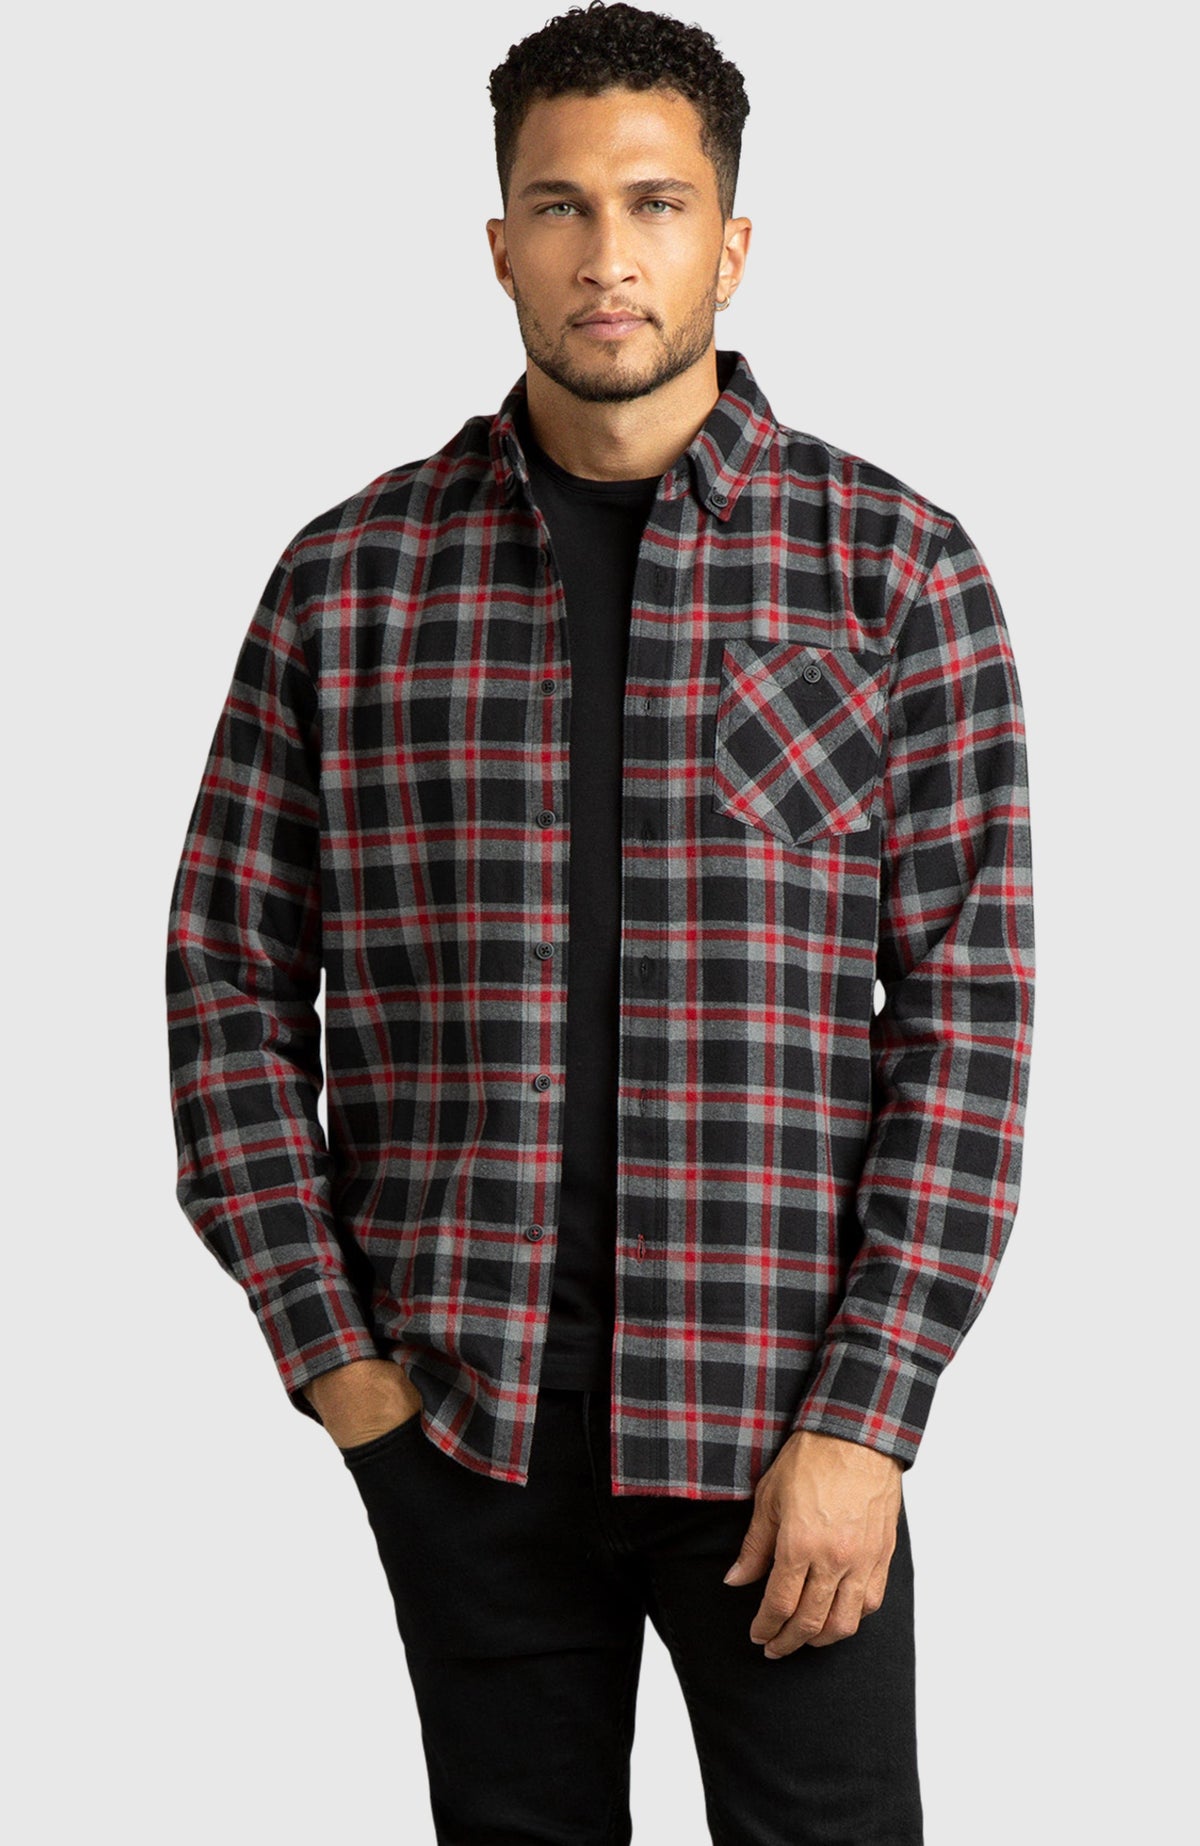 Boston Traders Men's Flannel Lined Cotton Canvas Shacket